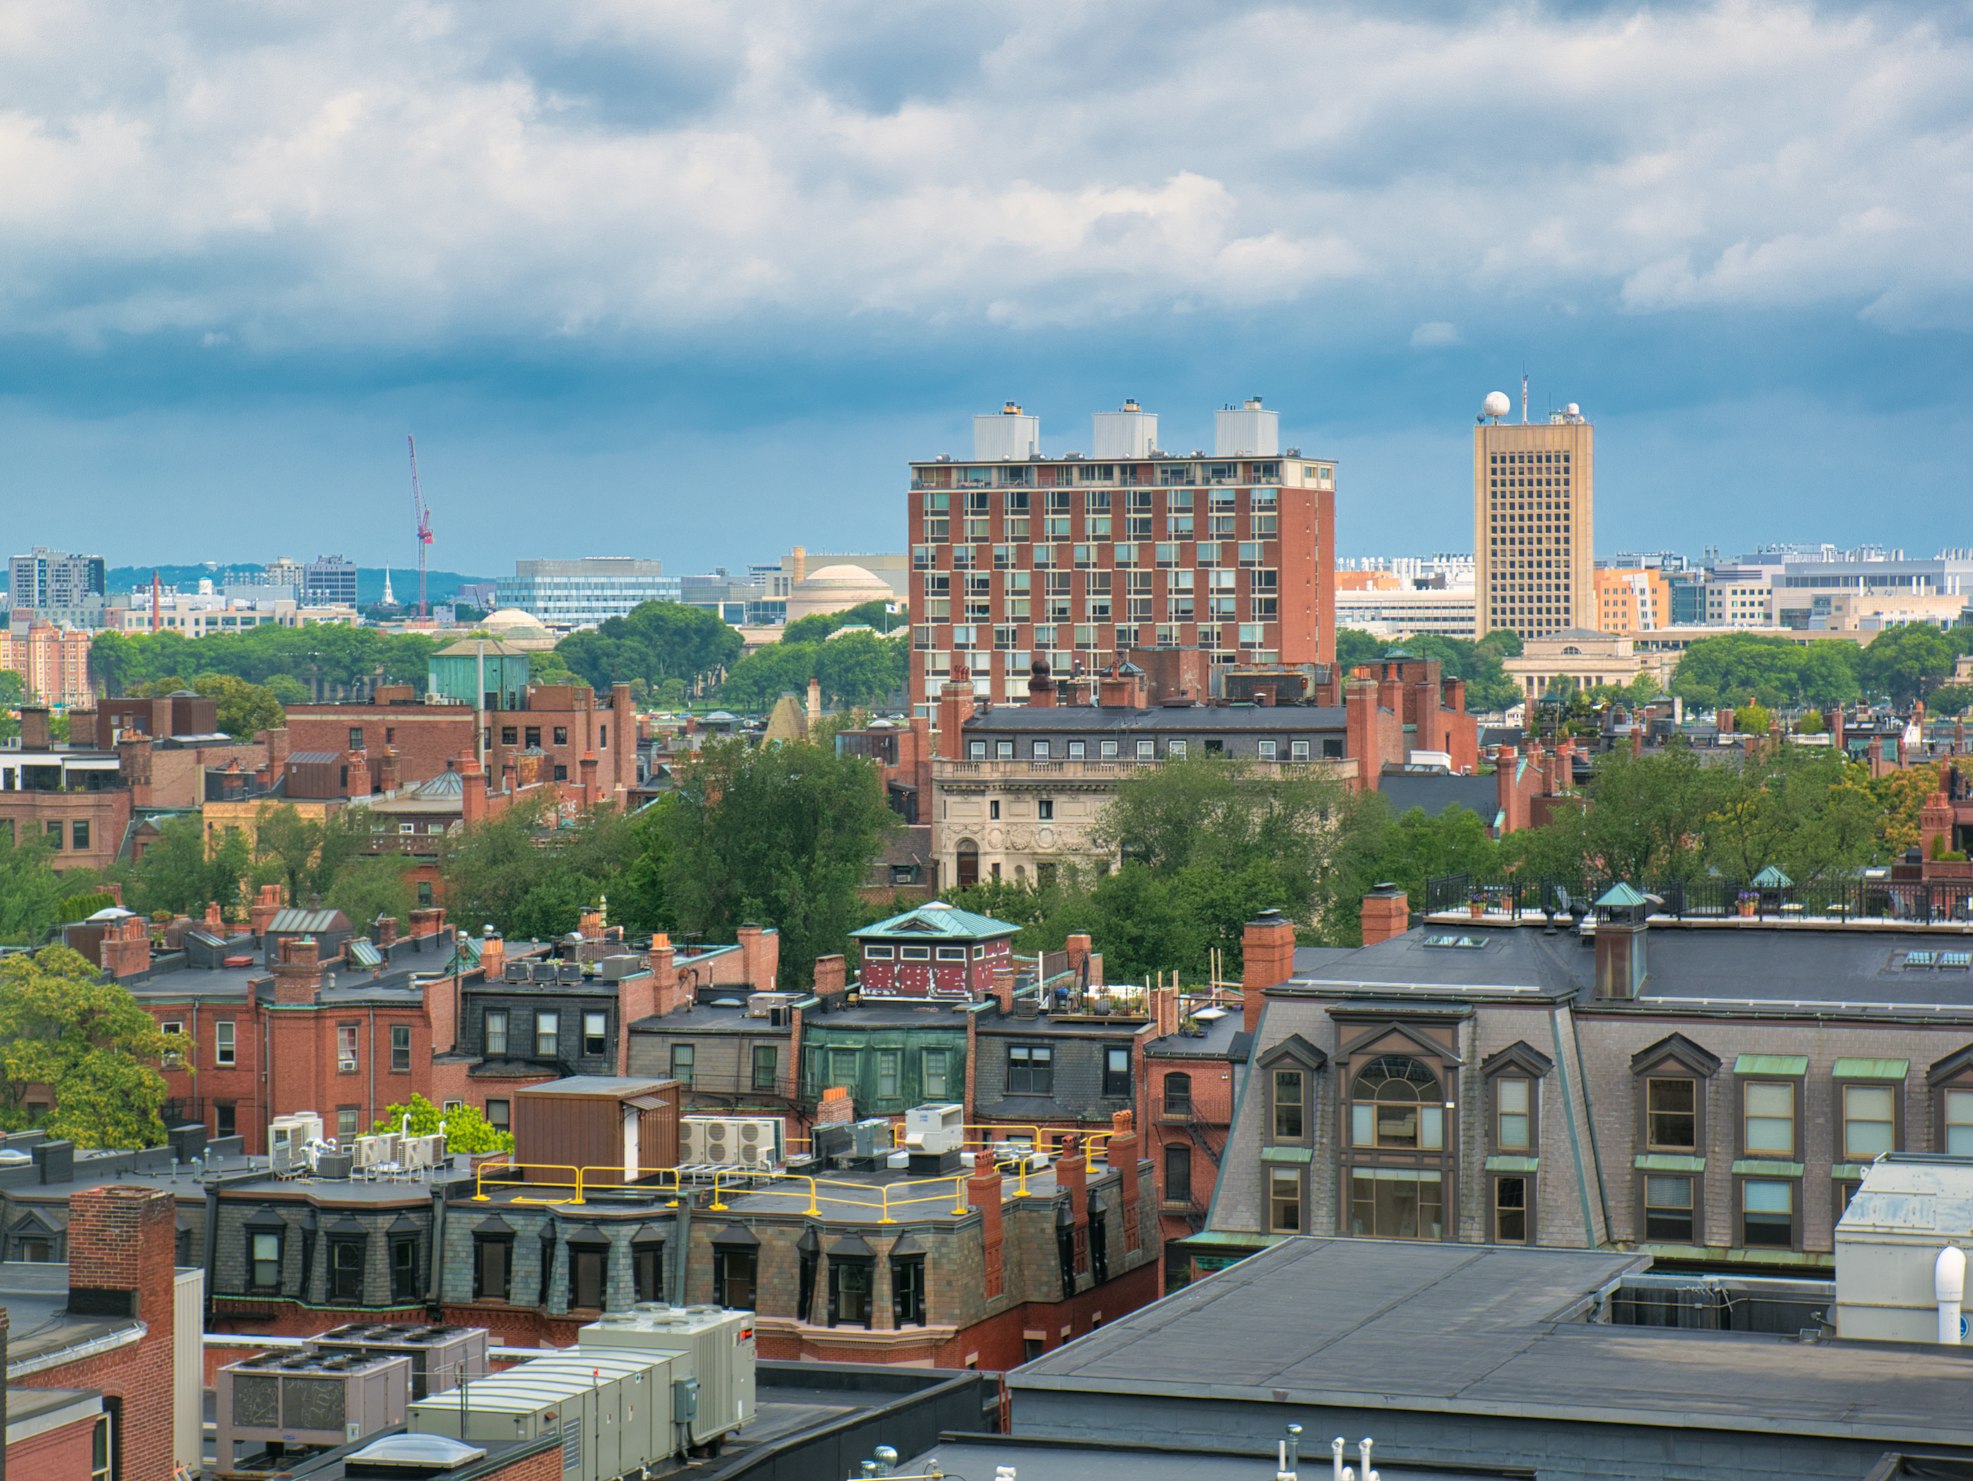  A Massachusetts cityscape with multi-family units